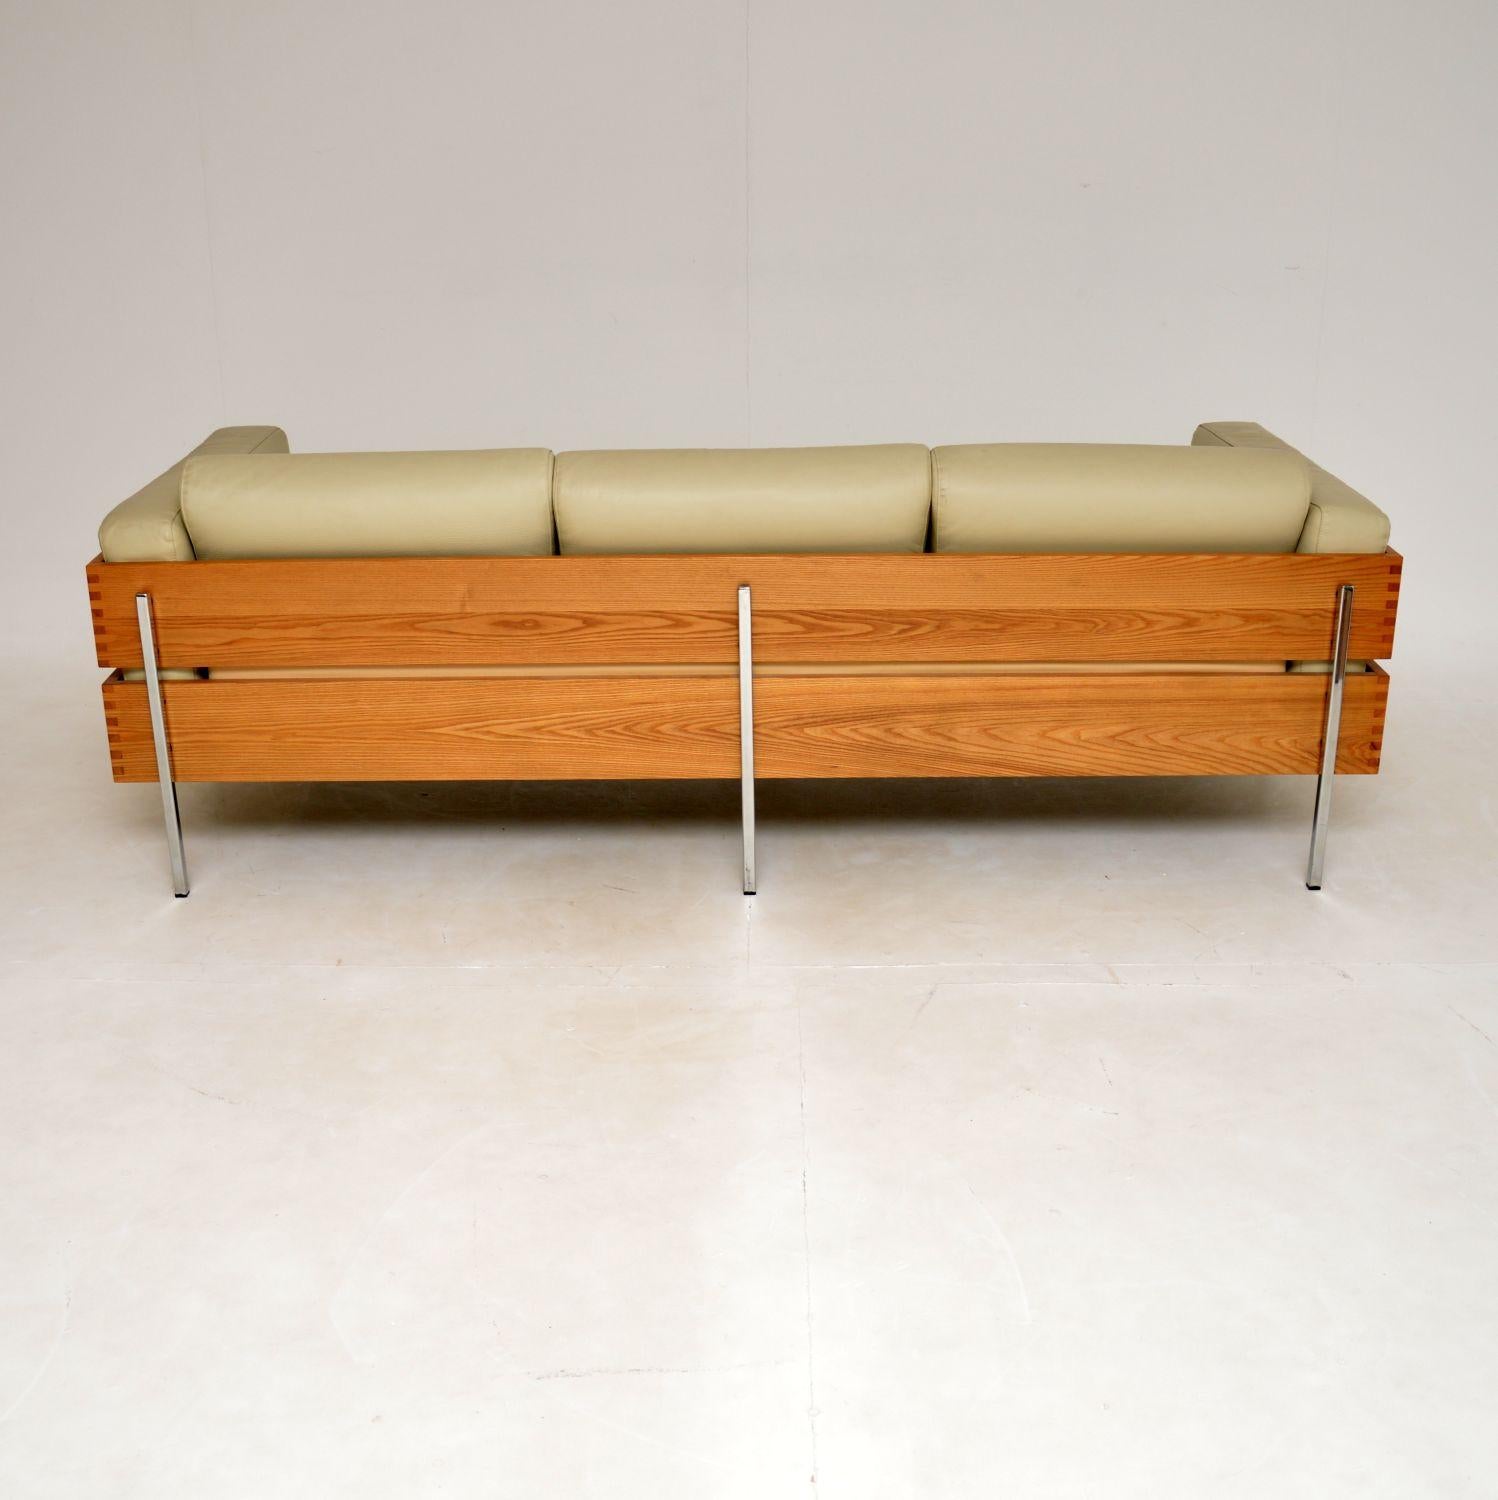 British Vintage Leather Forum Sofa by Robin Day for Habitat